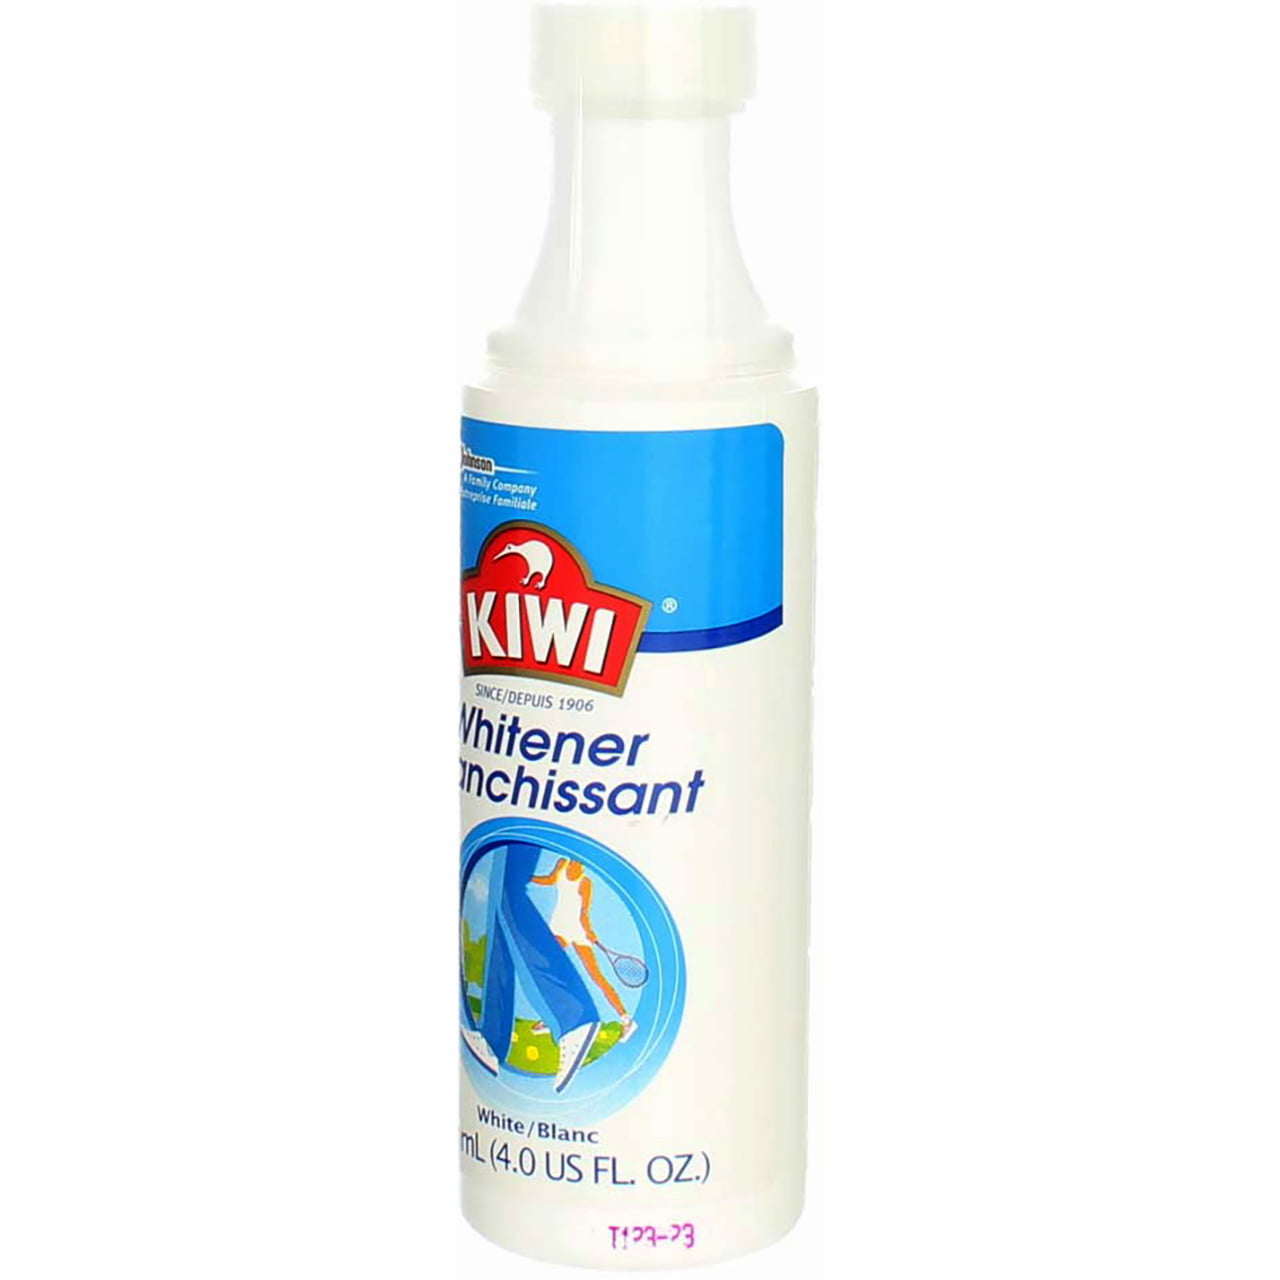 Absolutely crazy! Kiwi shoe whitener. $3.46 at Walmart, you can